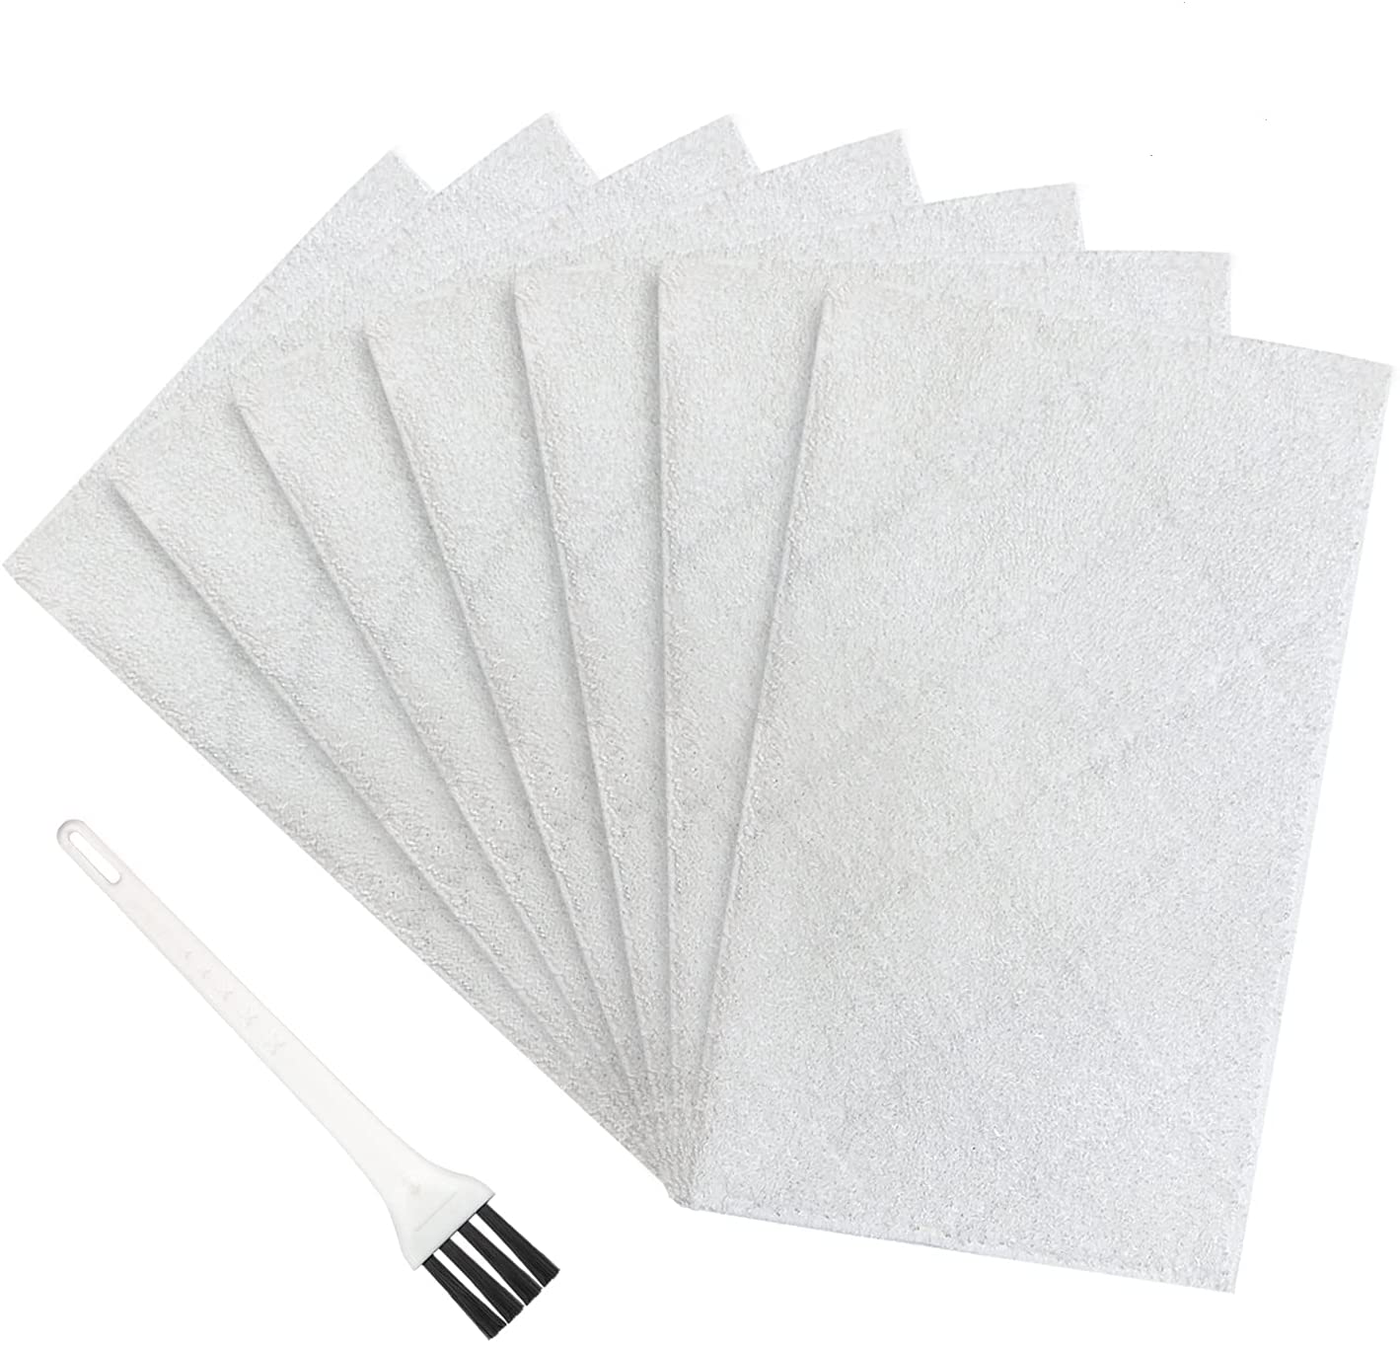 VCLENA Cleaning Mop pad Replacement Pads for Light N Easy S301 S3601 S3101 S7326 7688ANB 7688ANW 7618ANB 7618ANW Floor Steam Cleaner 7 Pack